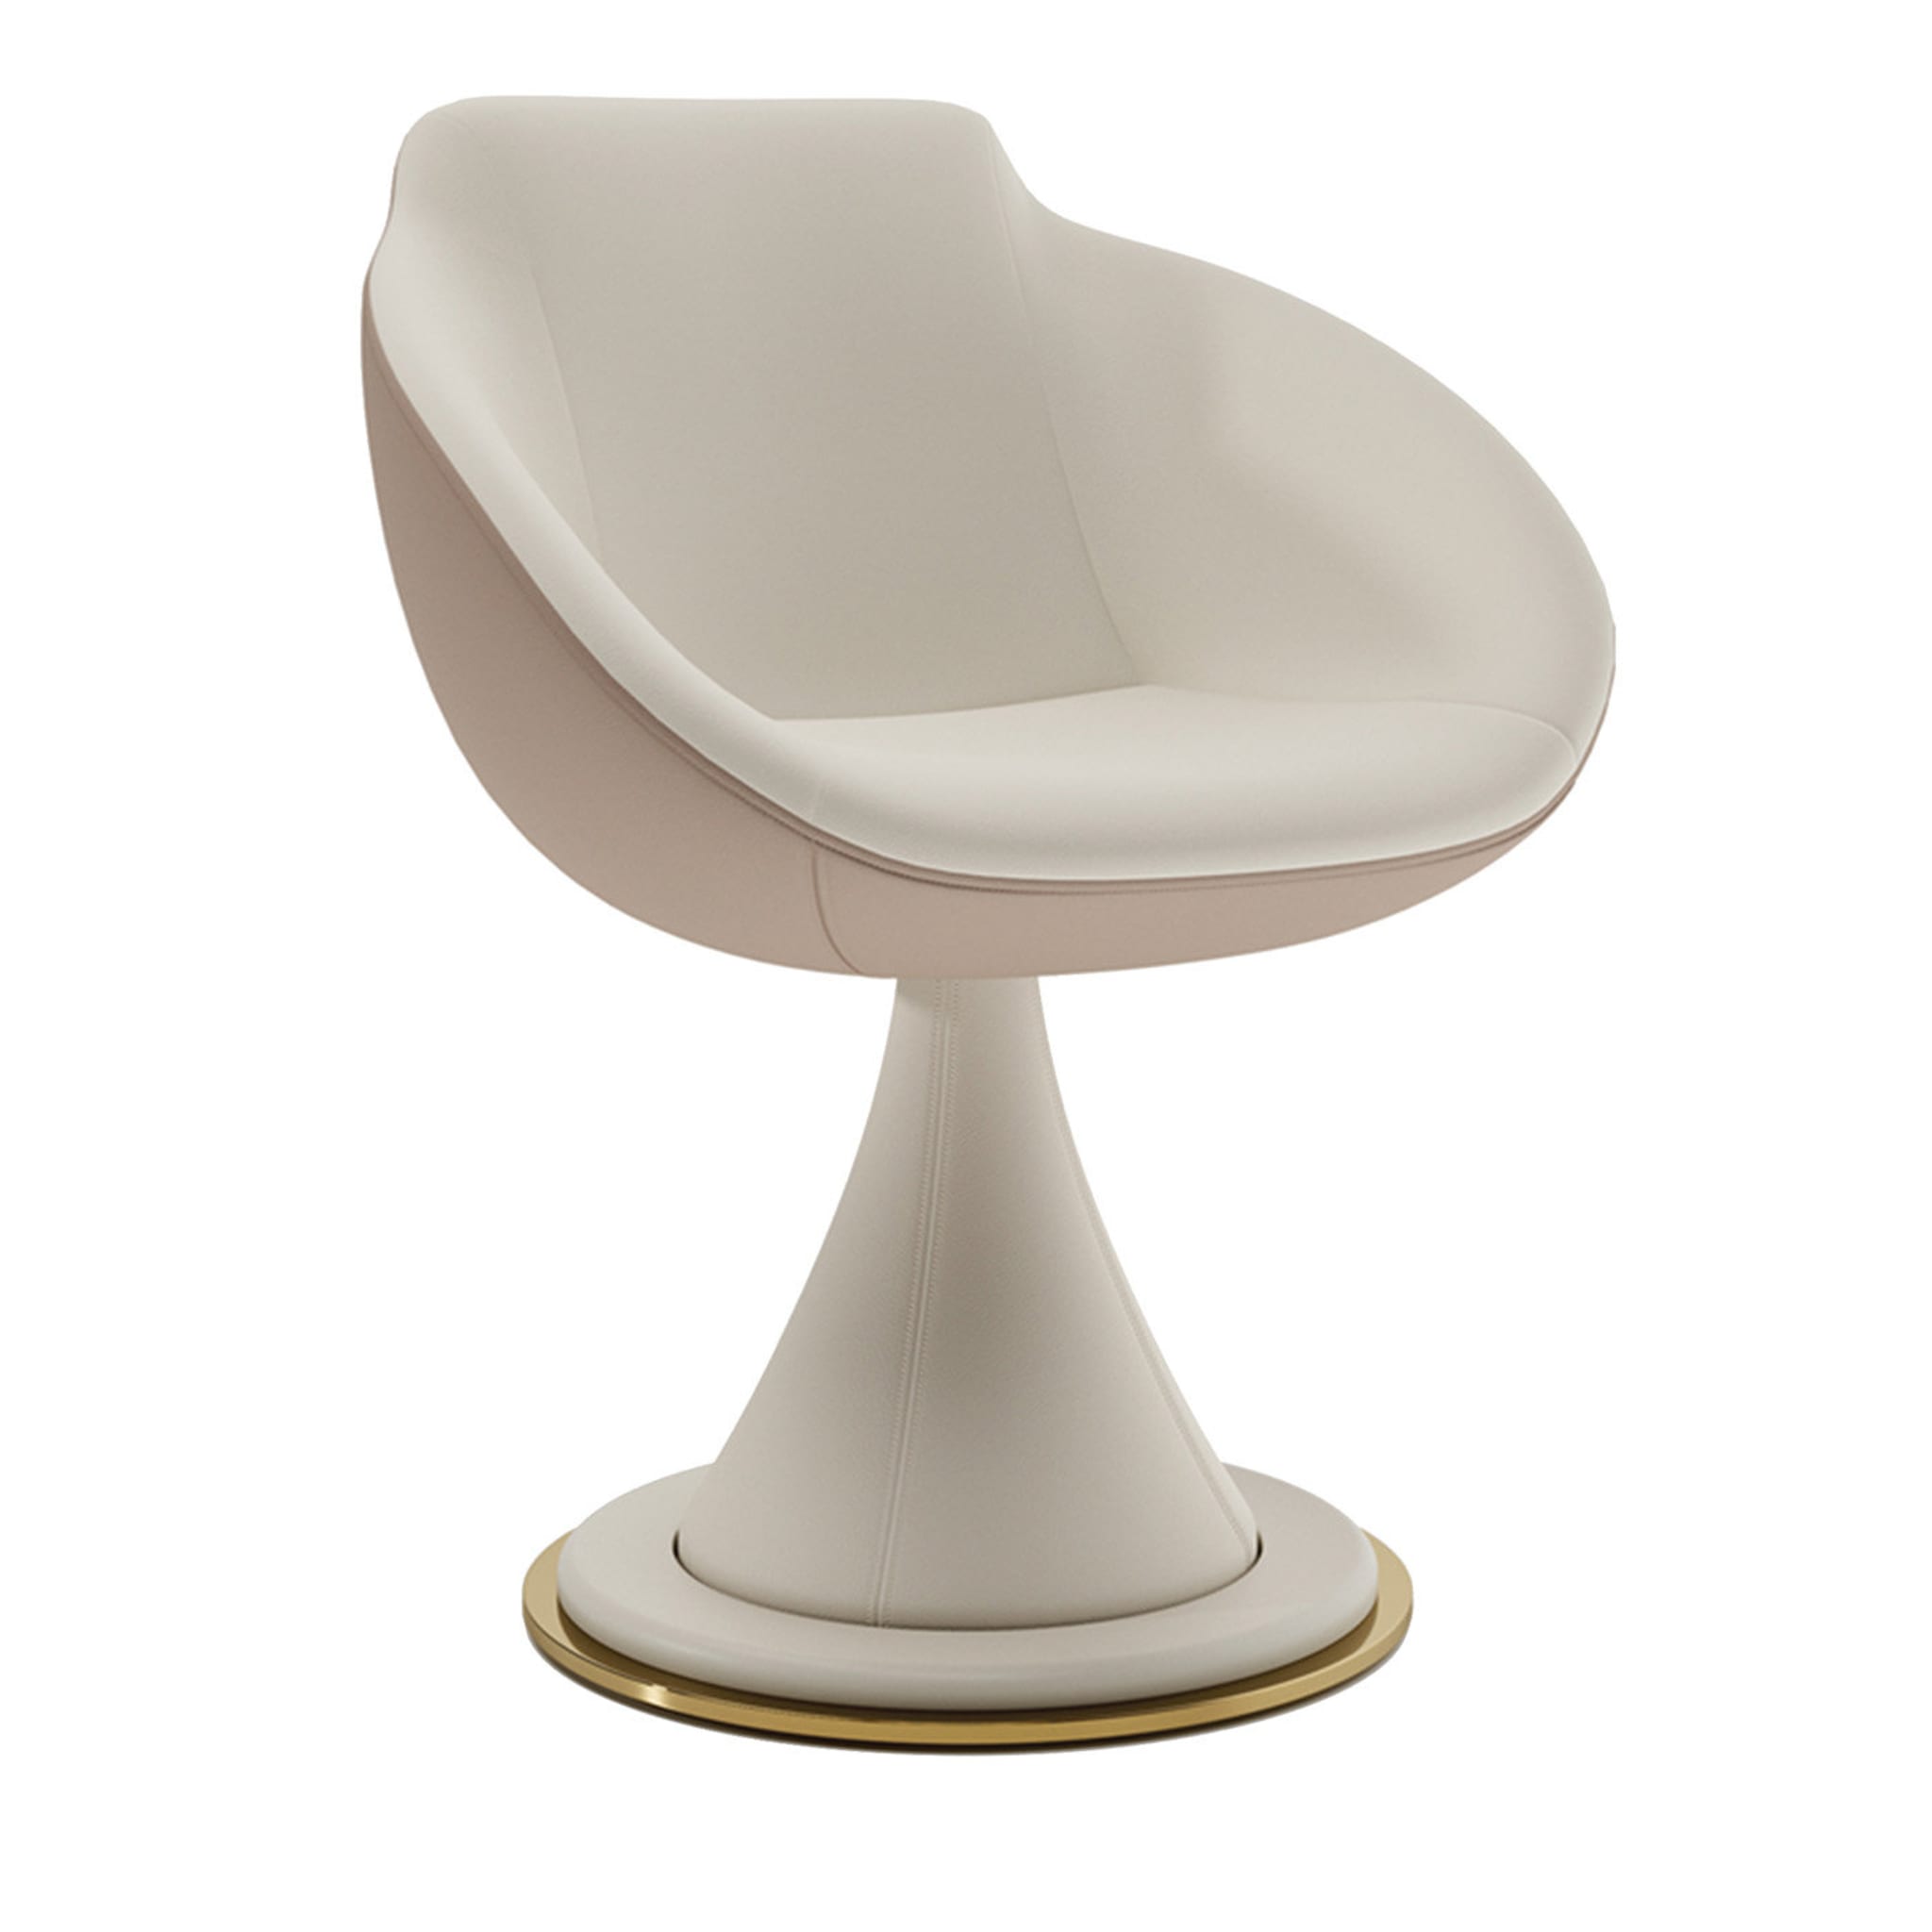 Cream White Upholstered Leather Foam Shell Swivel Chair - Main view